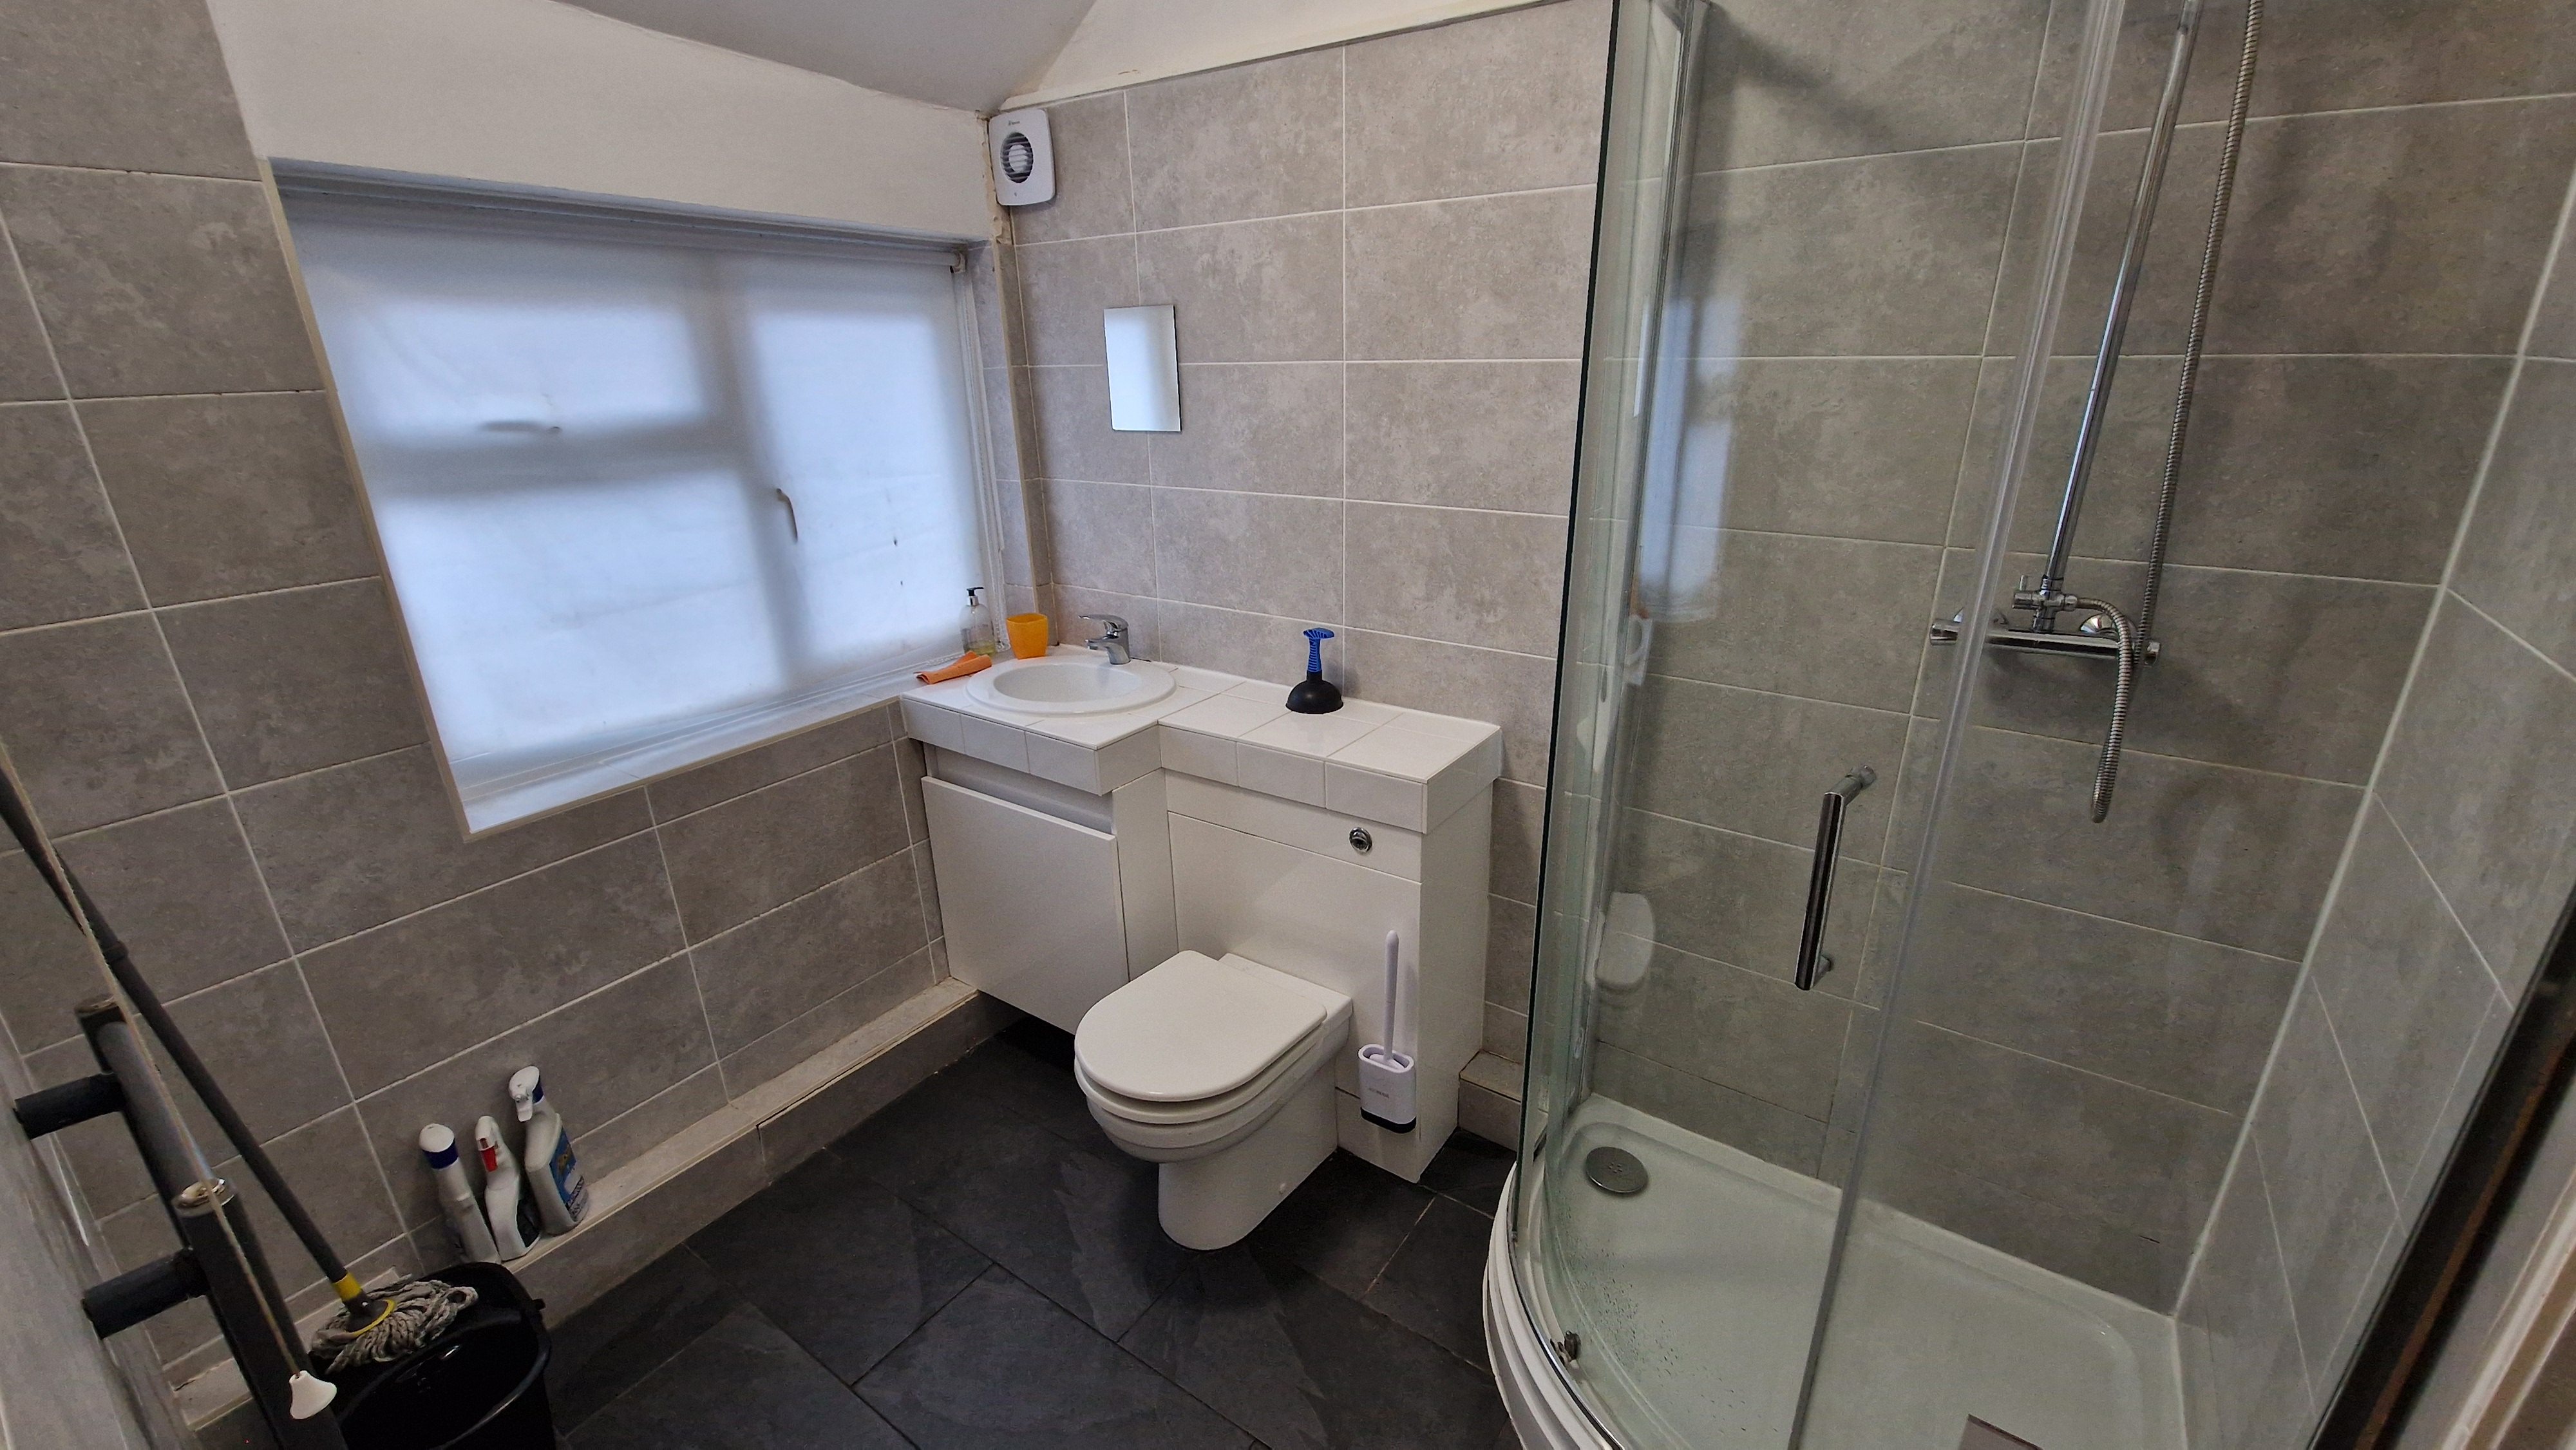 1 bed house / flat share to rent in Belvedere Road  - Property Image 5